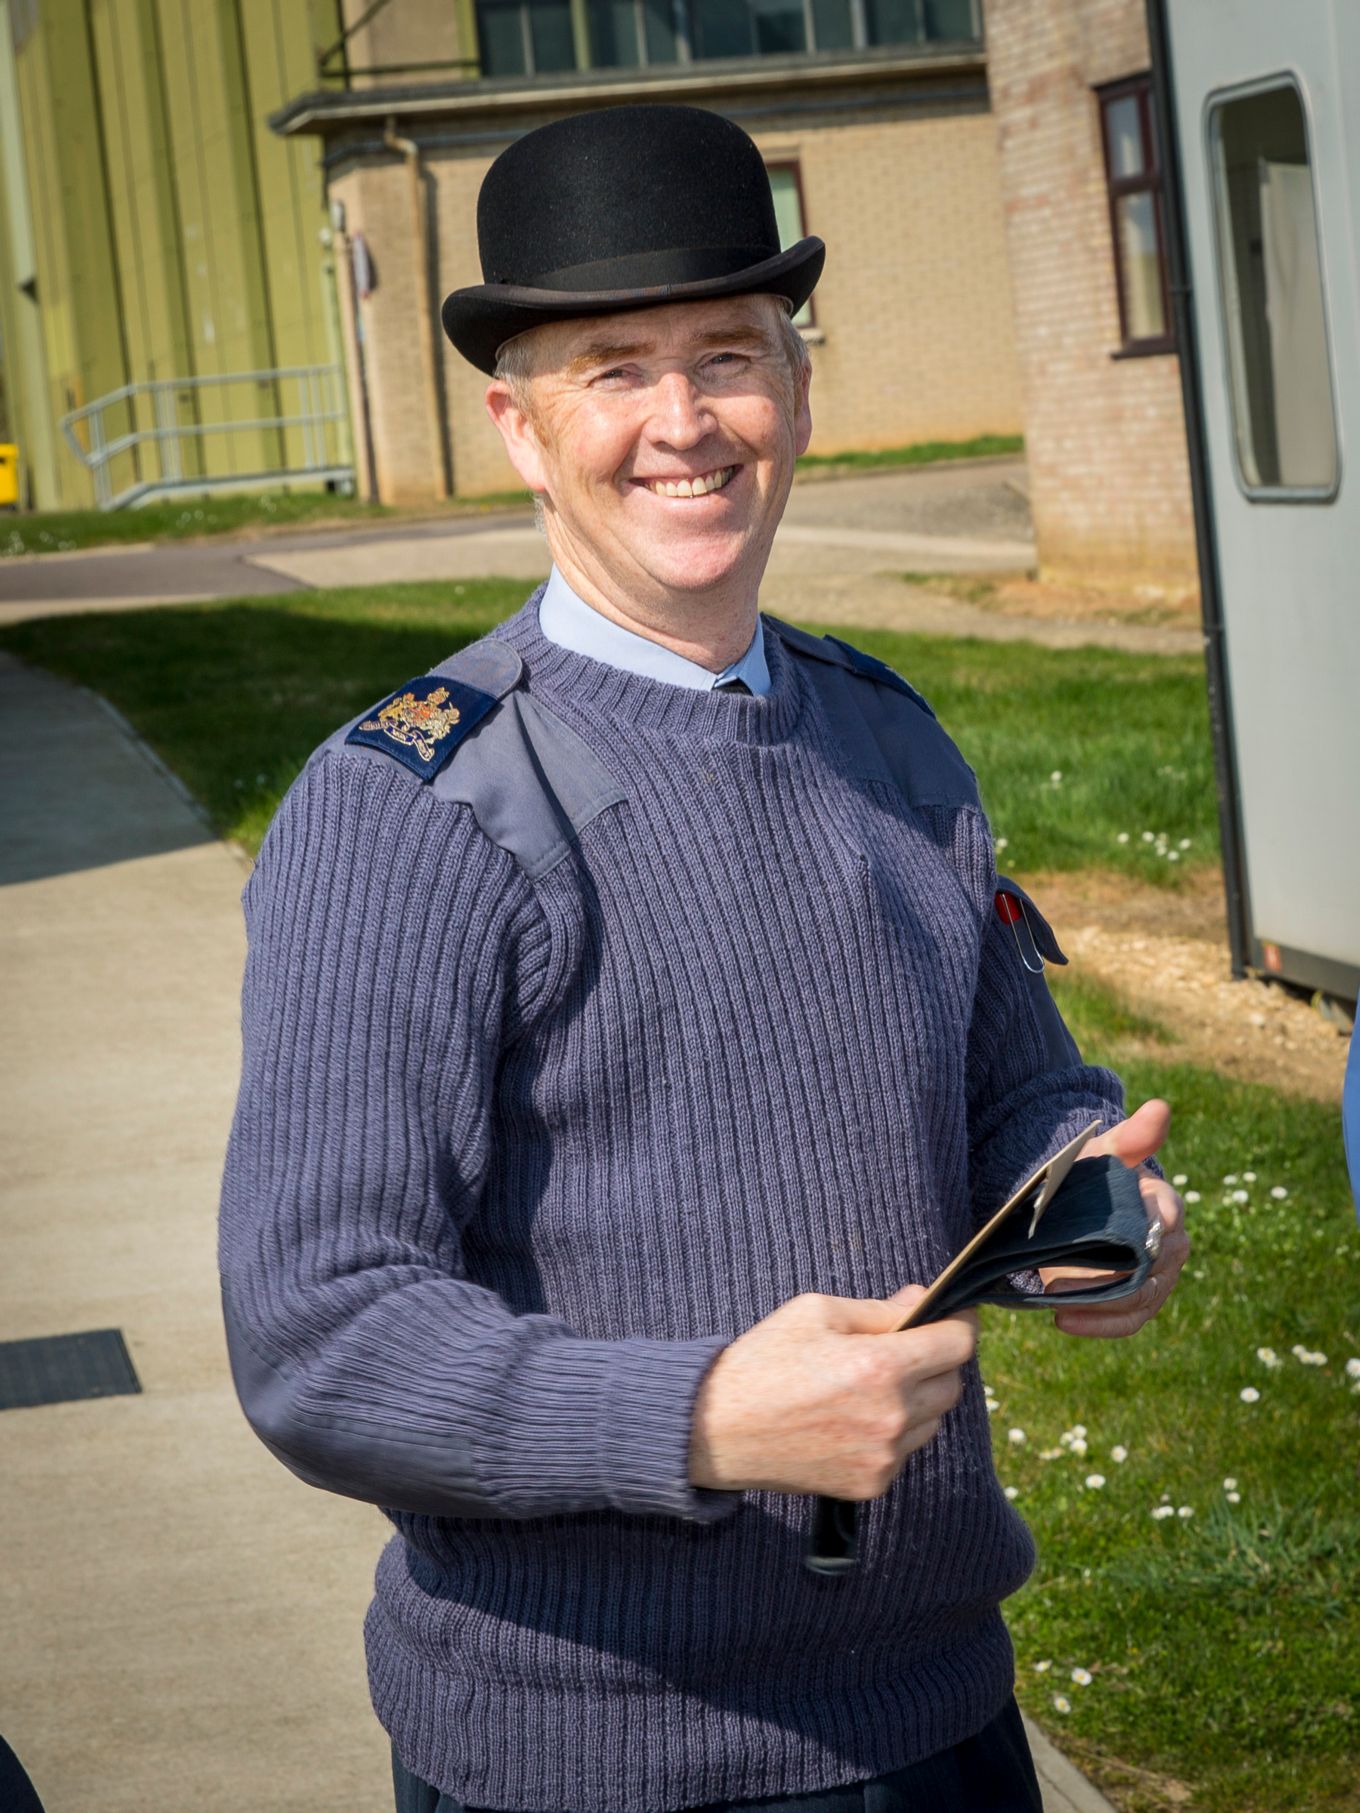 Mr Davies in the traditional bowler hat worn by retiring RAF Warrant Officers